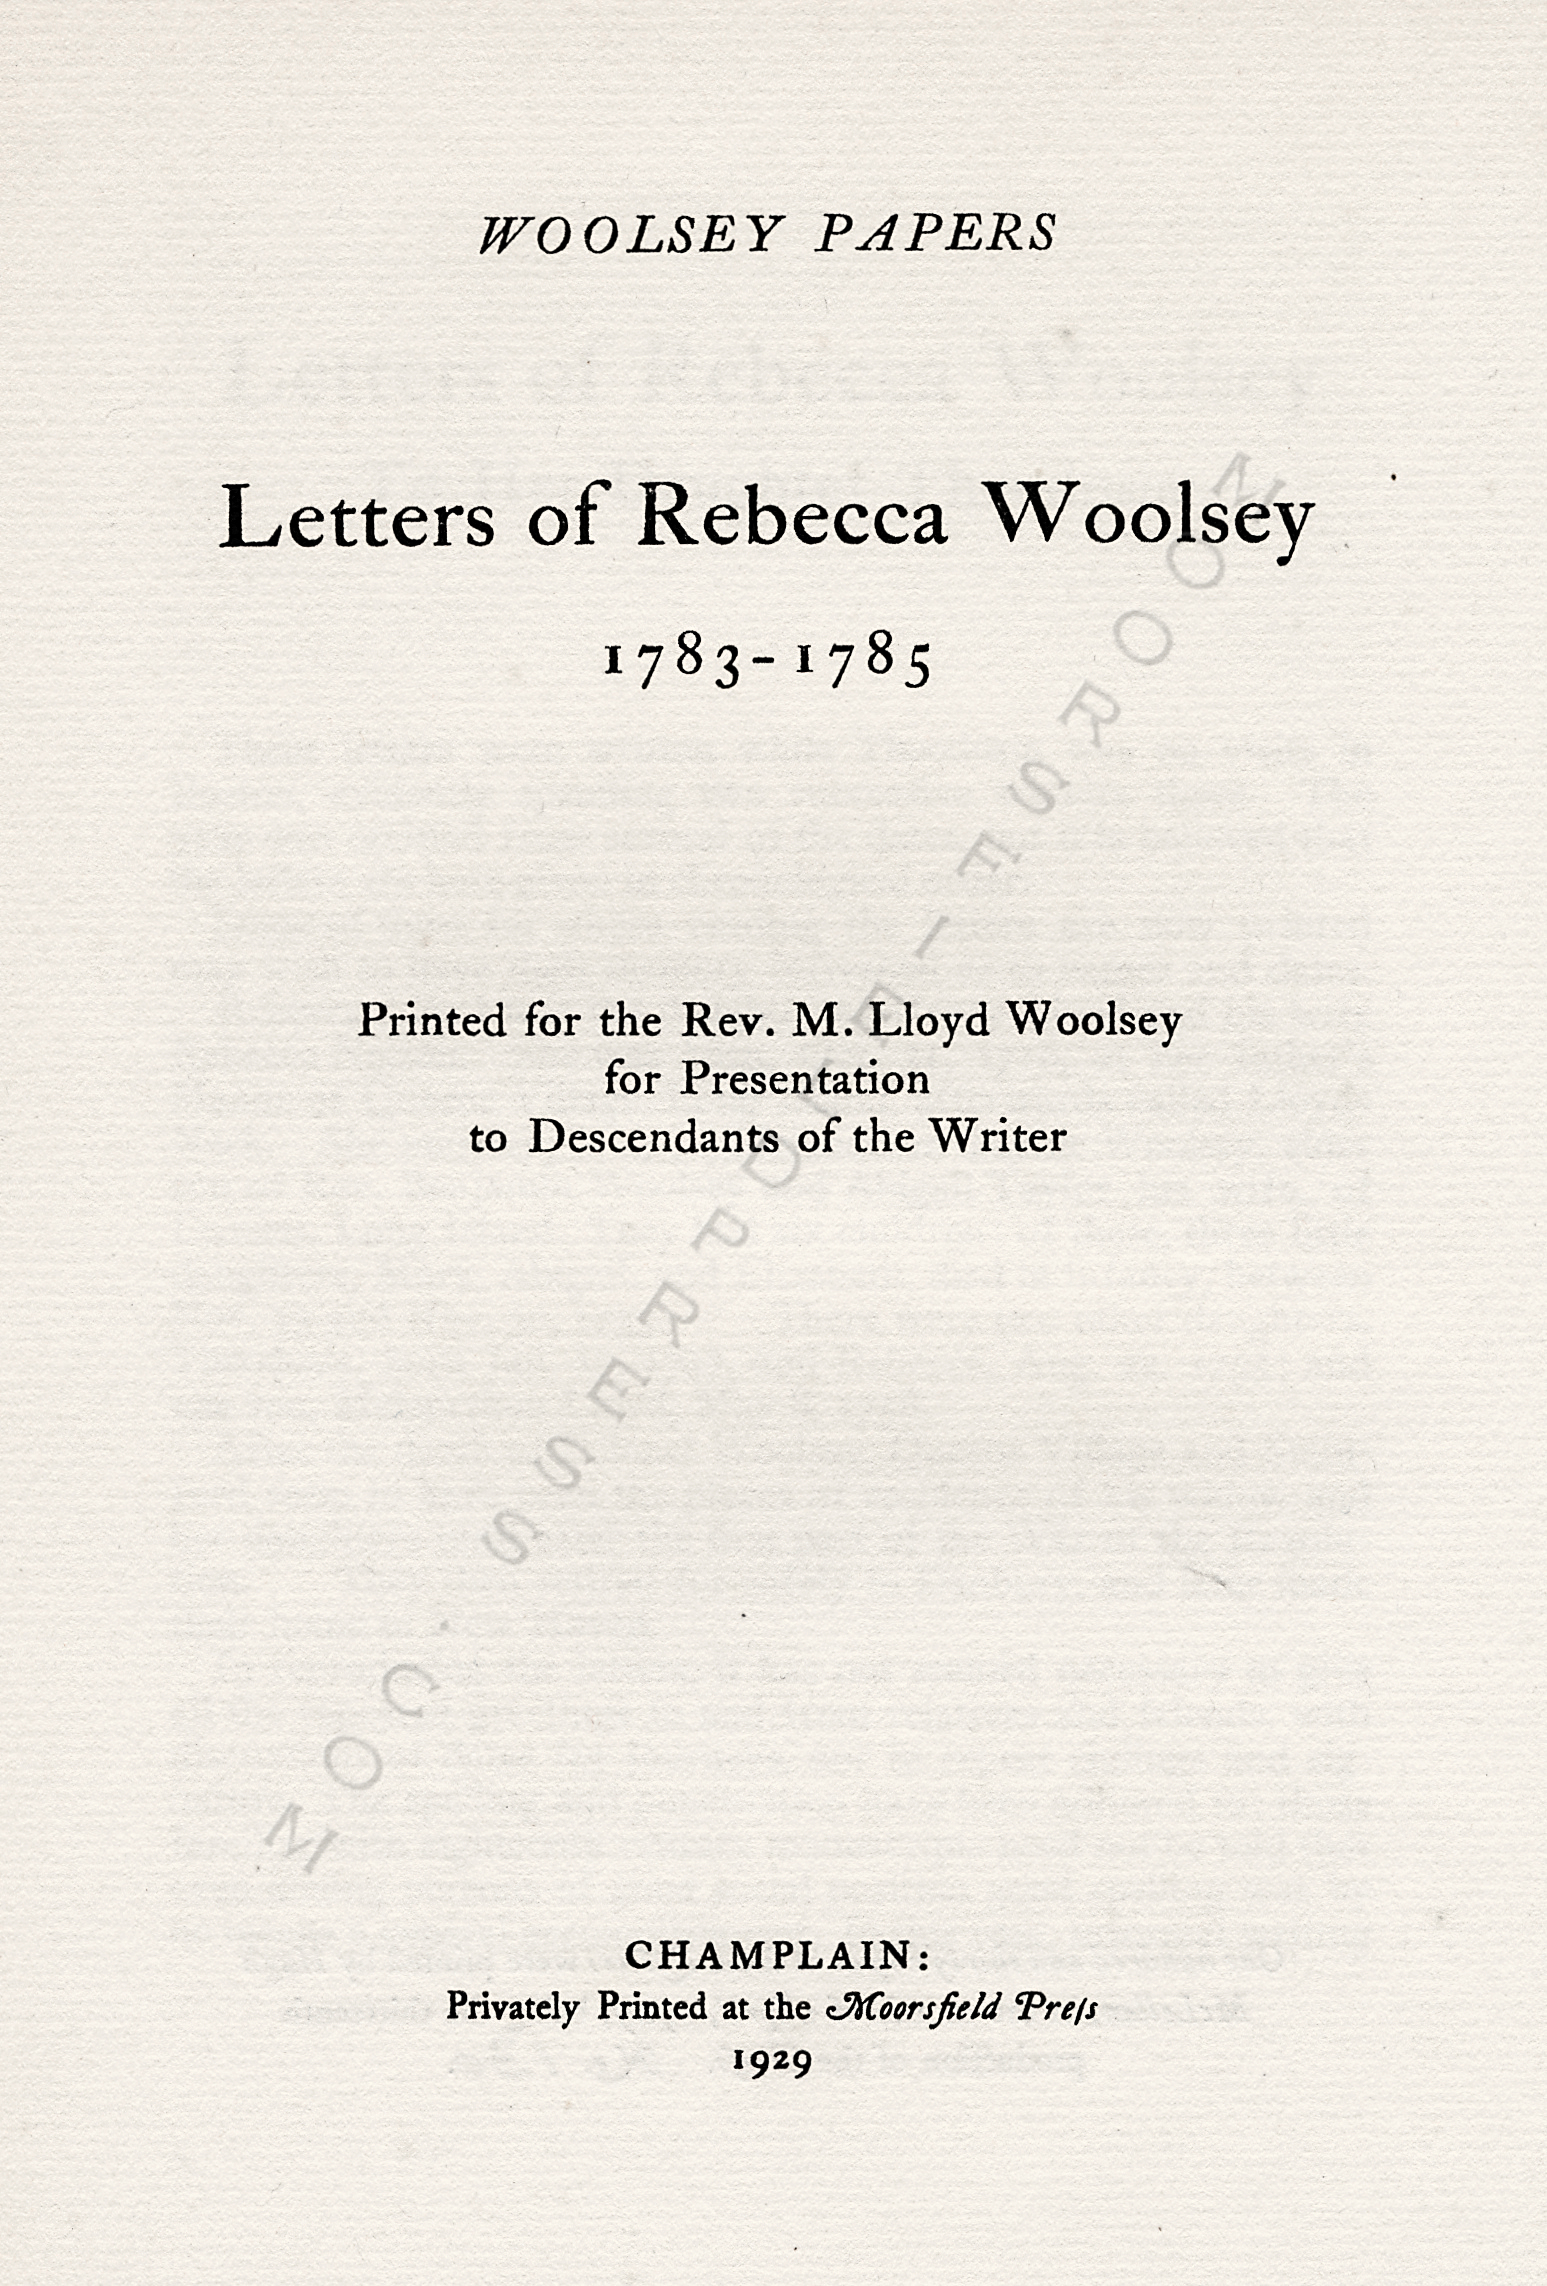 WOOLSEY
                      PAPERS 2=LETTERS OF REBECCA WOOLSEY